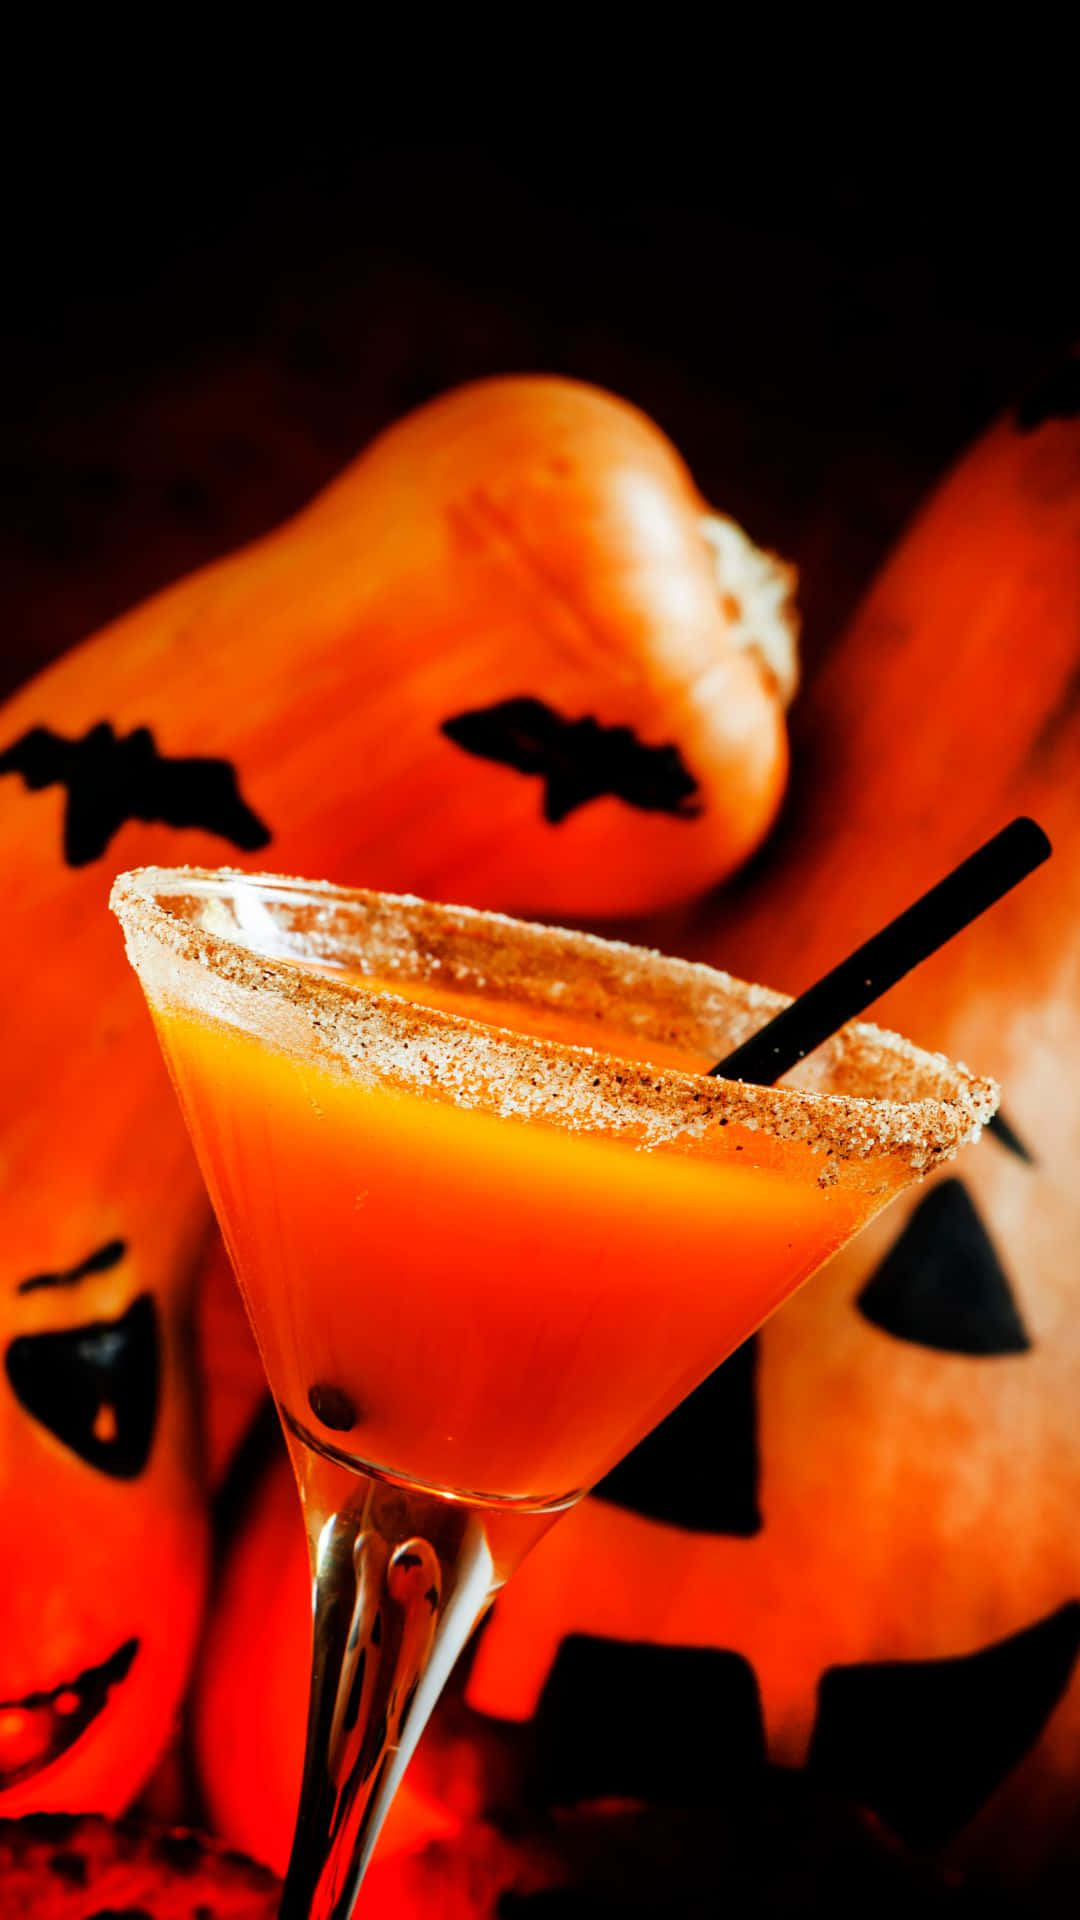 "A deliciously spooky concoction awaits at your next Halloween get-together" Wallpaper